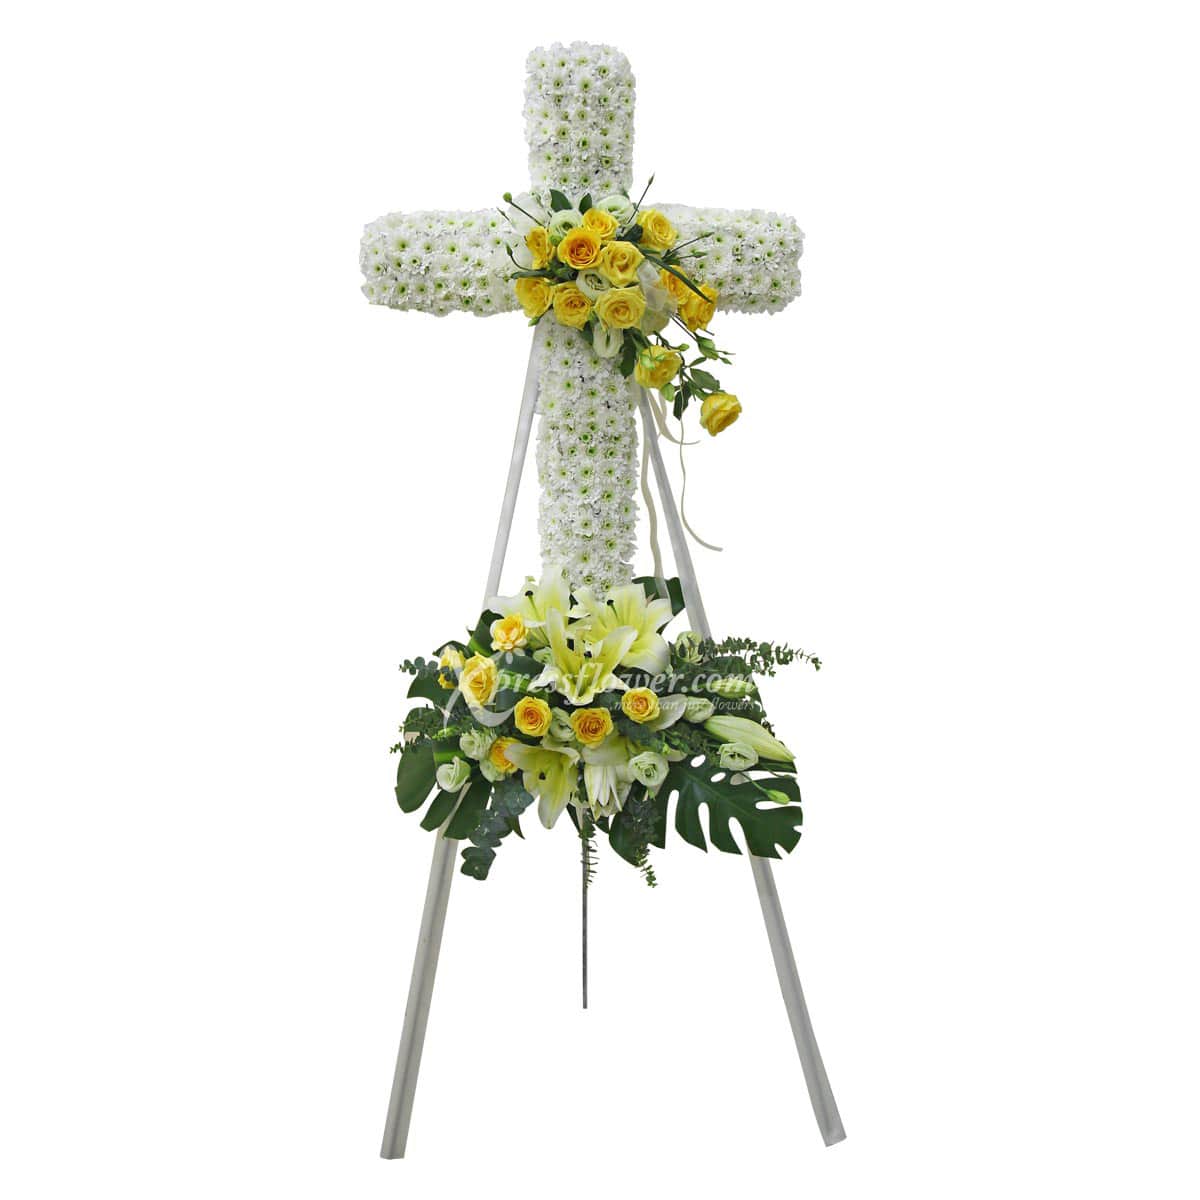 Thoughts & Prayers (Funeral Condolence Flower Wreath)